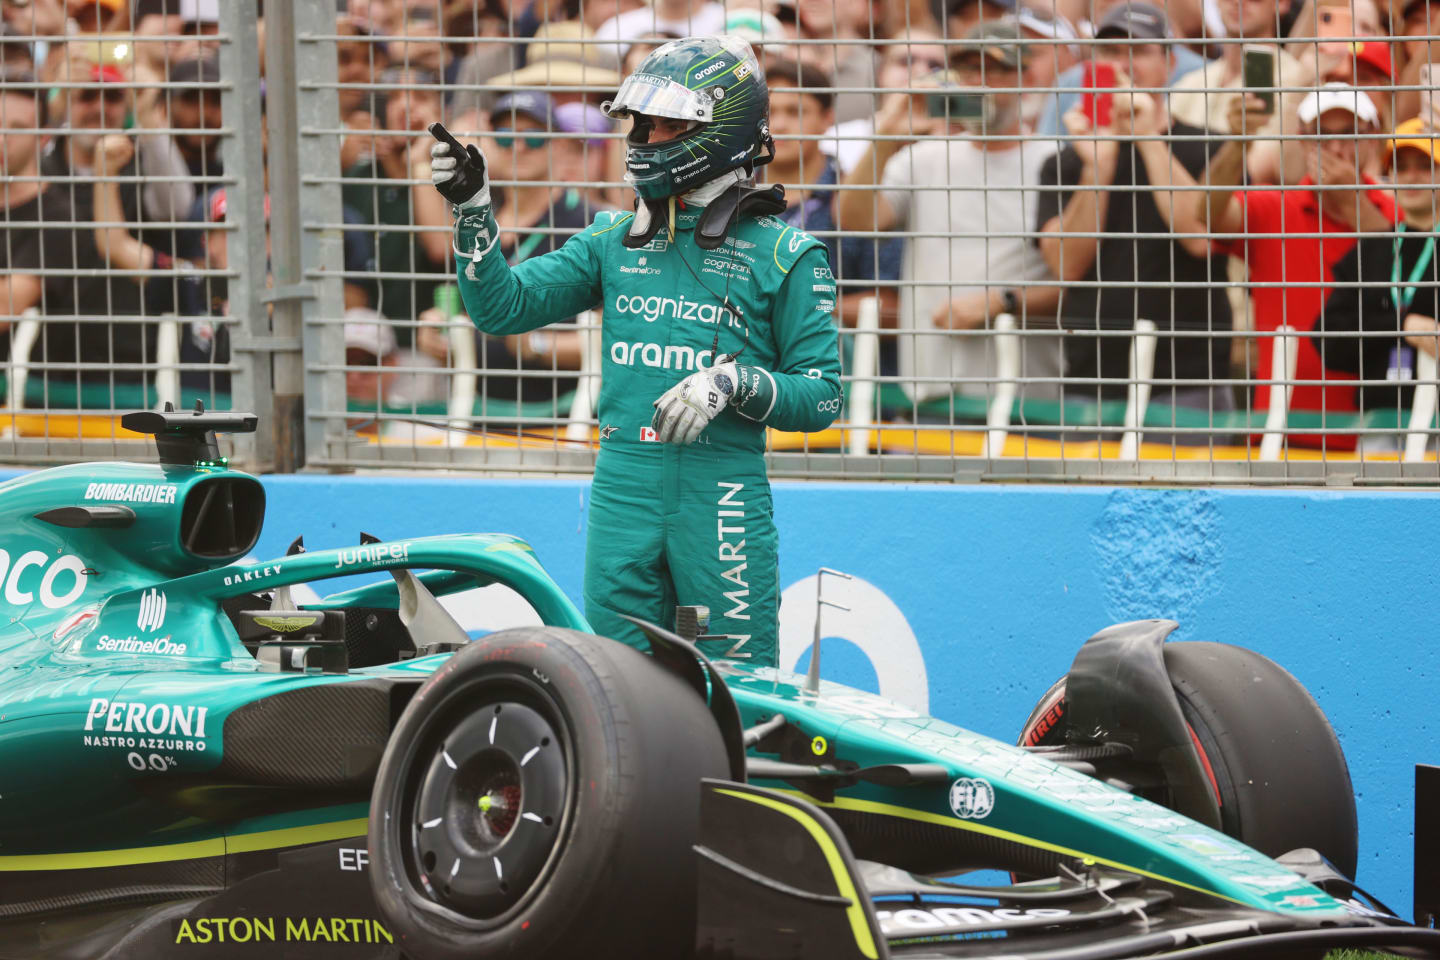 MELBOURNE, AUSTRALIA - APRIL 09: Lance Stroll of Canada and Aston Martin F1 Team gestures after crashing during qualifying ahead of the F1 Grand Prix of Australia at Melbourne Grand Prix Circuit on April 09, 2022 in Melbourne, Australia. (Photo by Robert Cianflone/Getty Images)